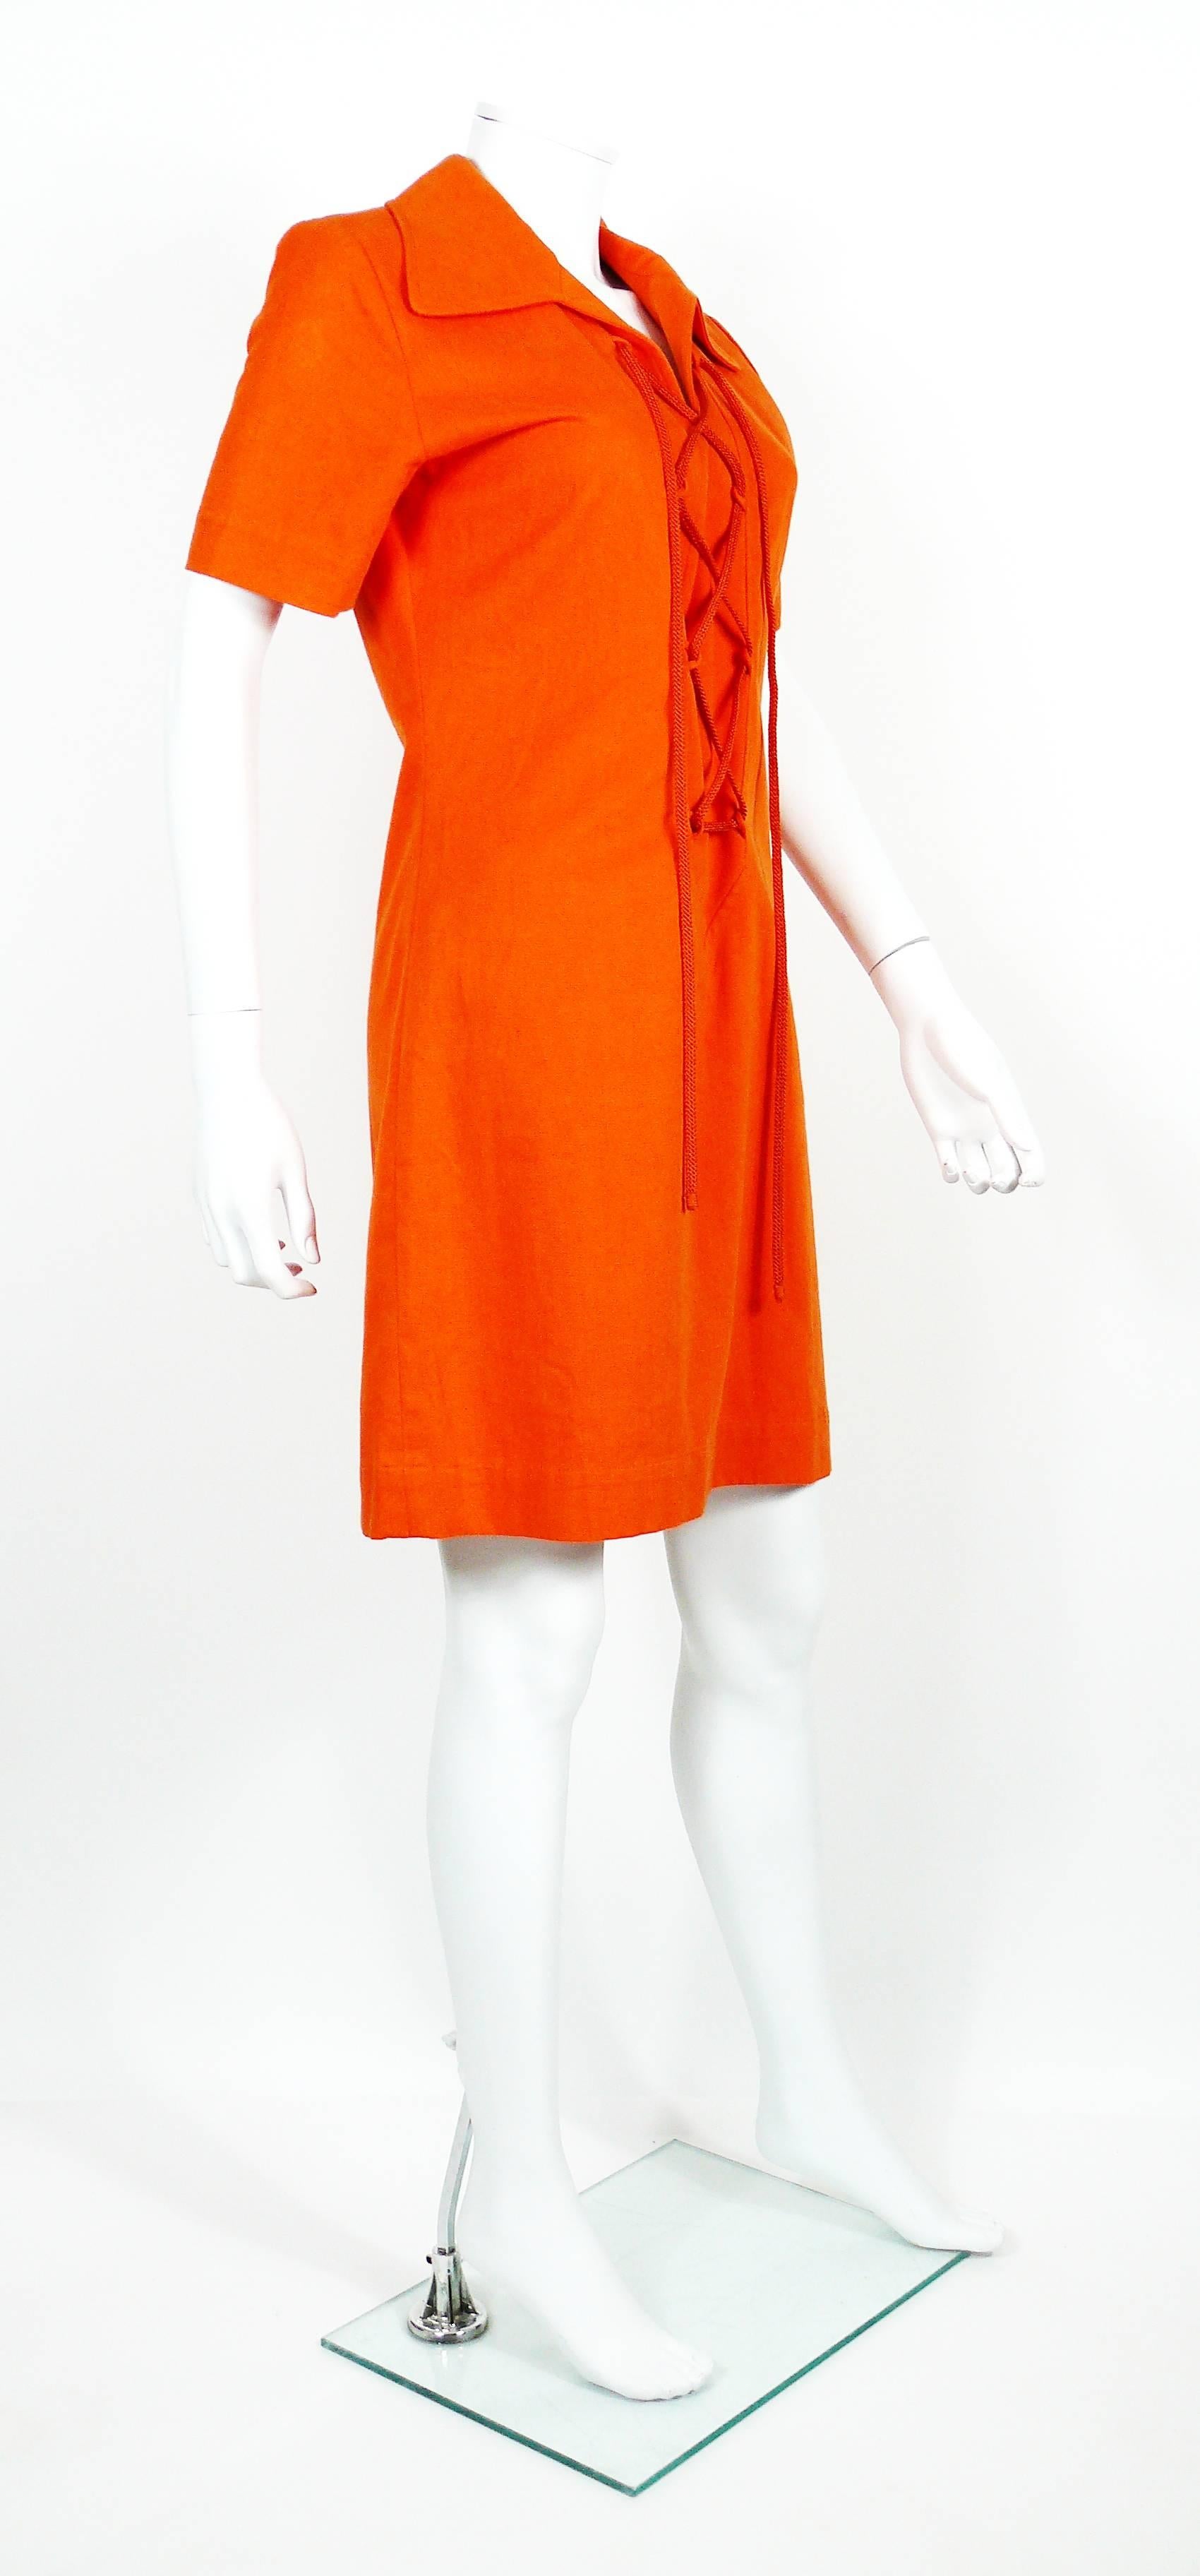 YVES SAINT LAURENT RIVE GAUCHE vintage 1980s Safari dress in bright burnt orange cotton fabric featuring lace-up front with original orange cord and a side slit.

Label reads YVES SAINT LAURENT RIVE GAUCHE Paris.
Made in France.

Size label reads :